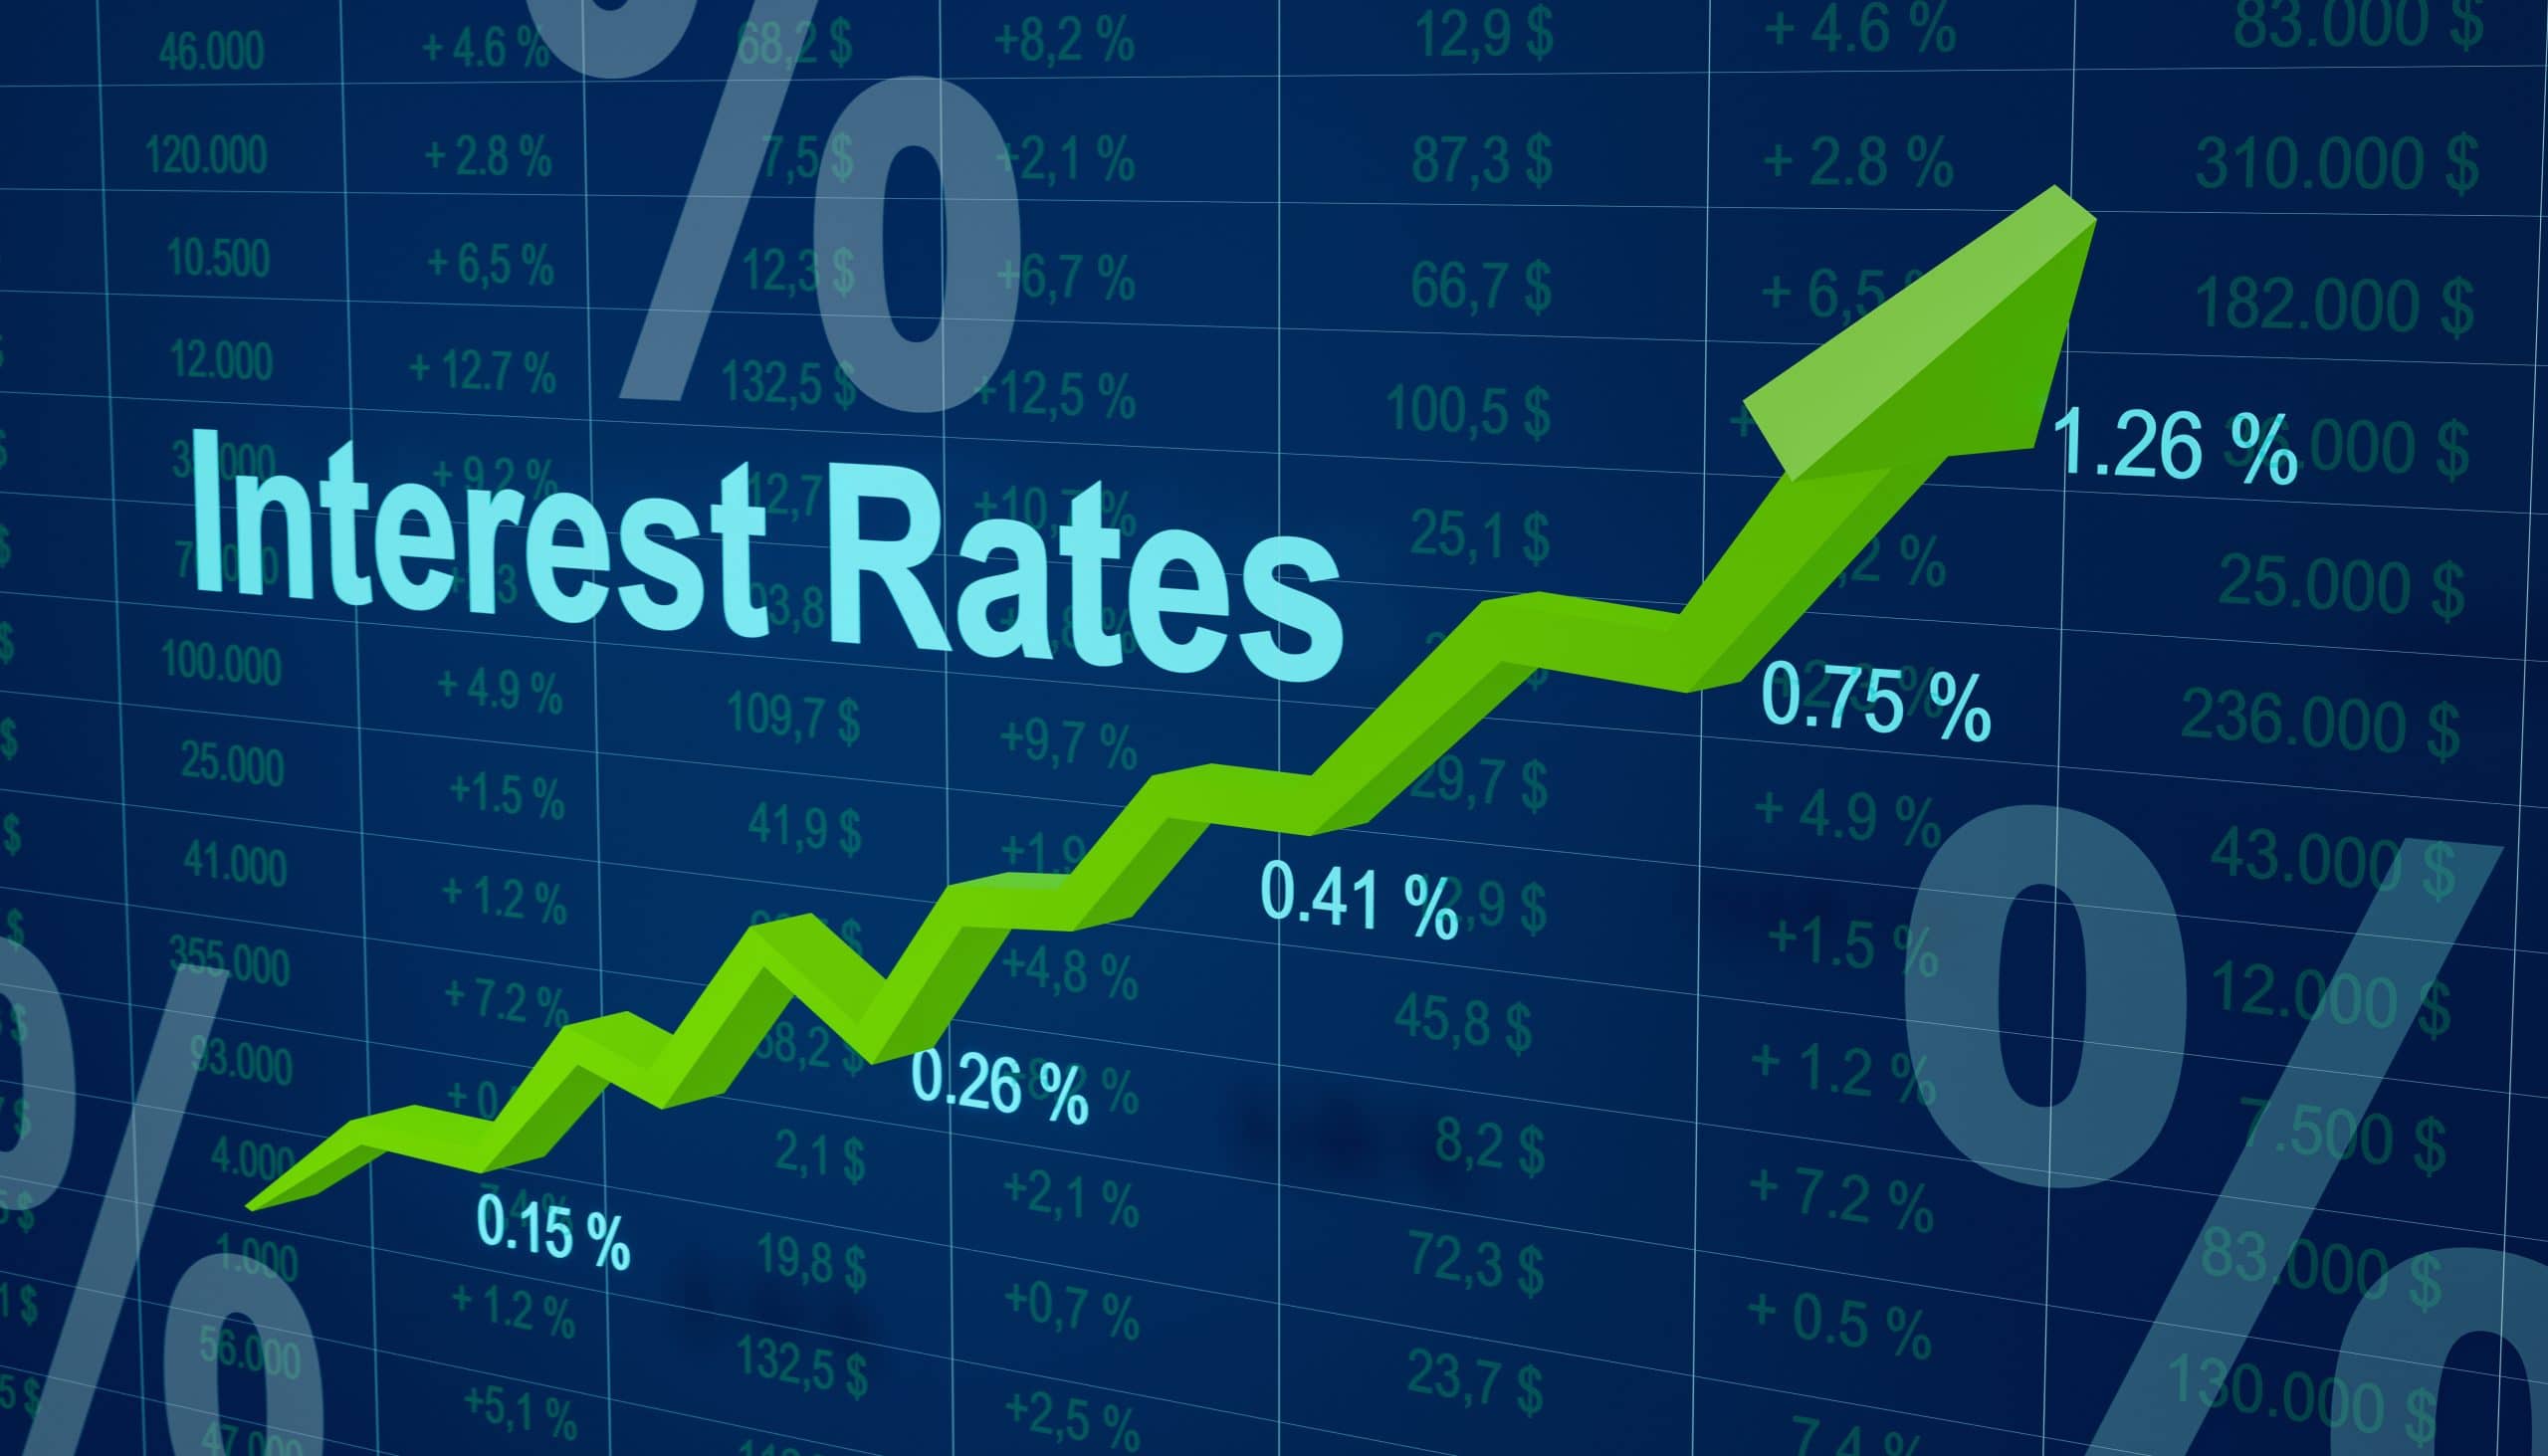 Rising Interest Rates Leads to Slight Uptick in Housing Inventory